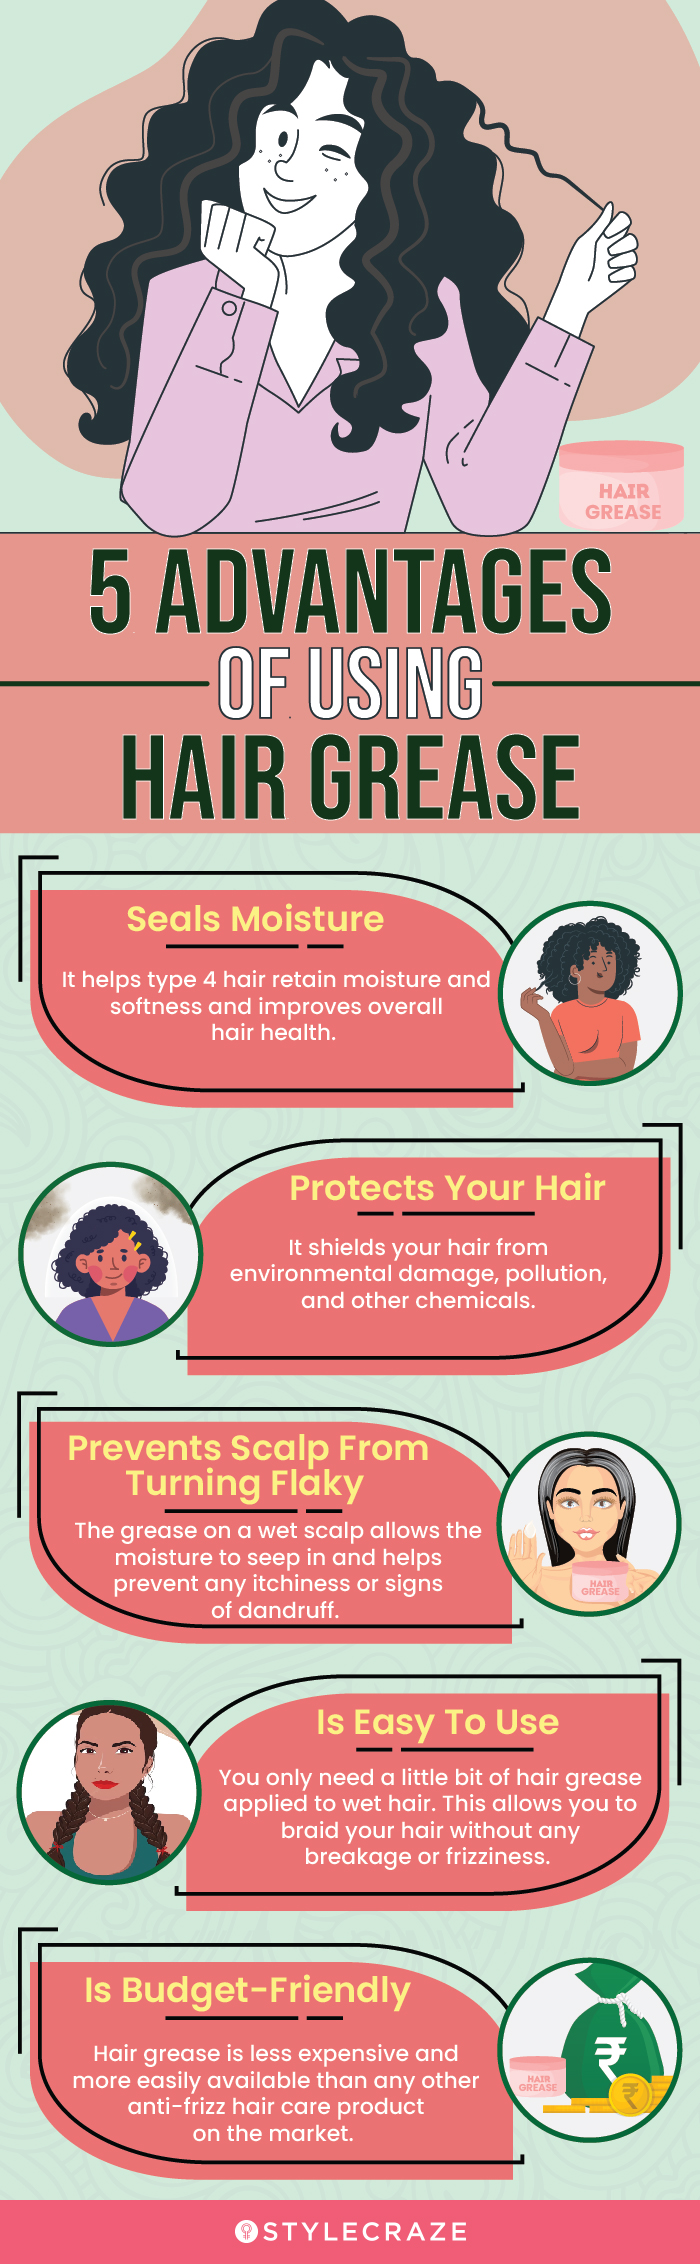 5 advantages of using hair grease (infographic)